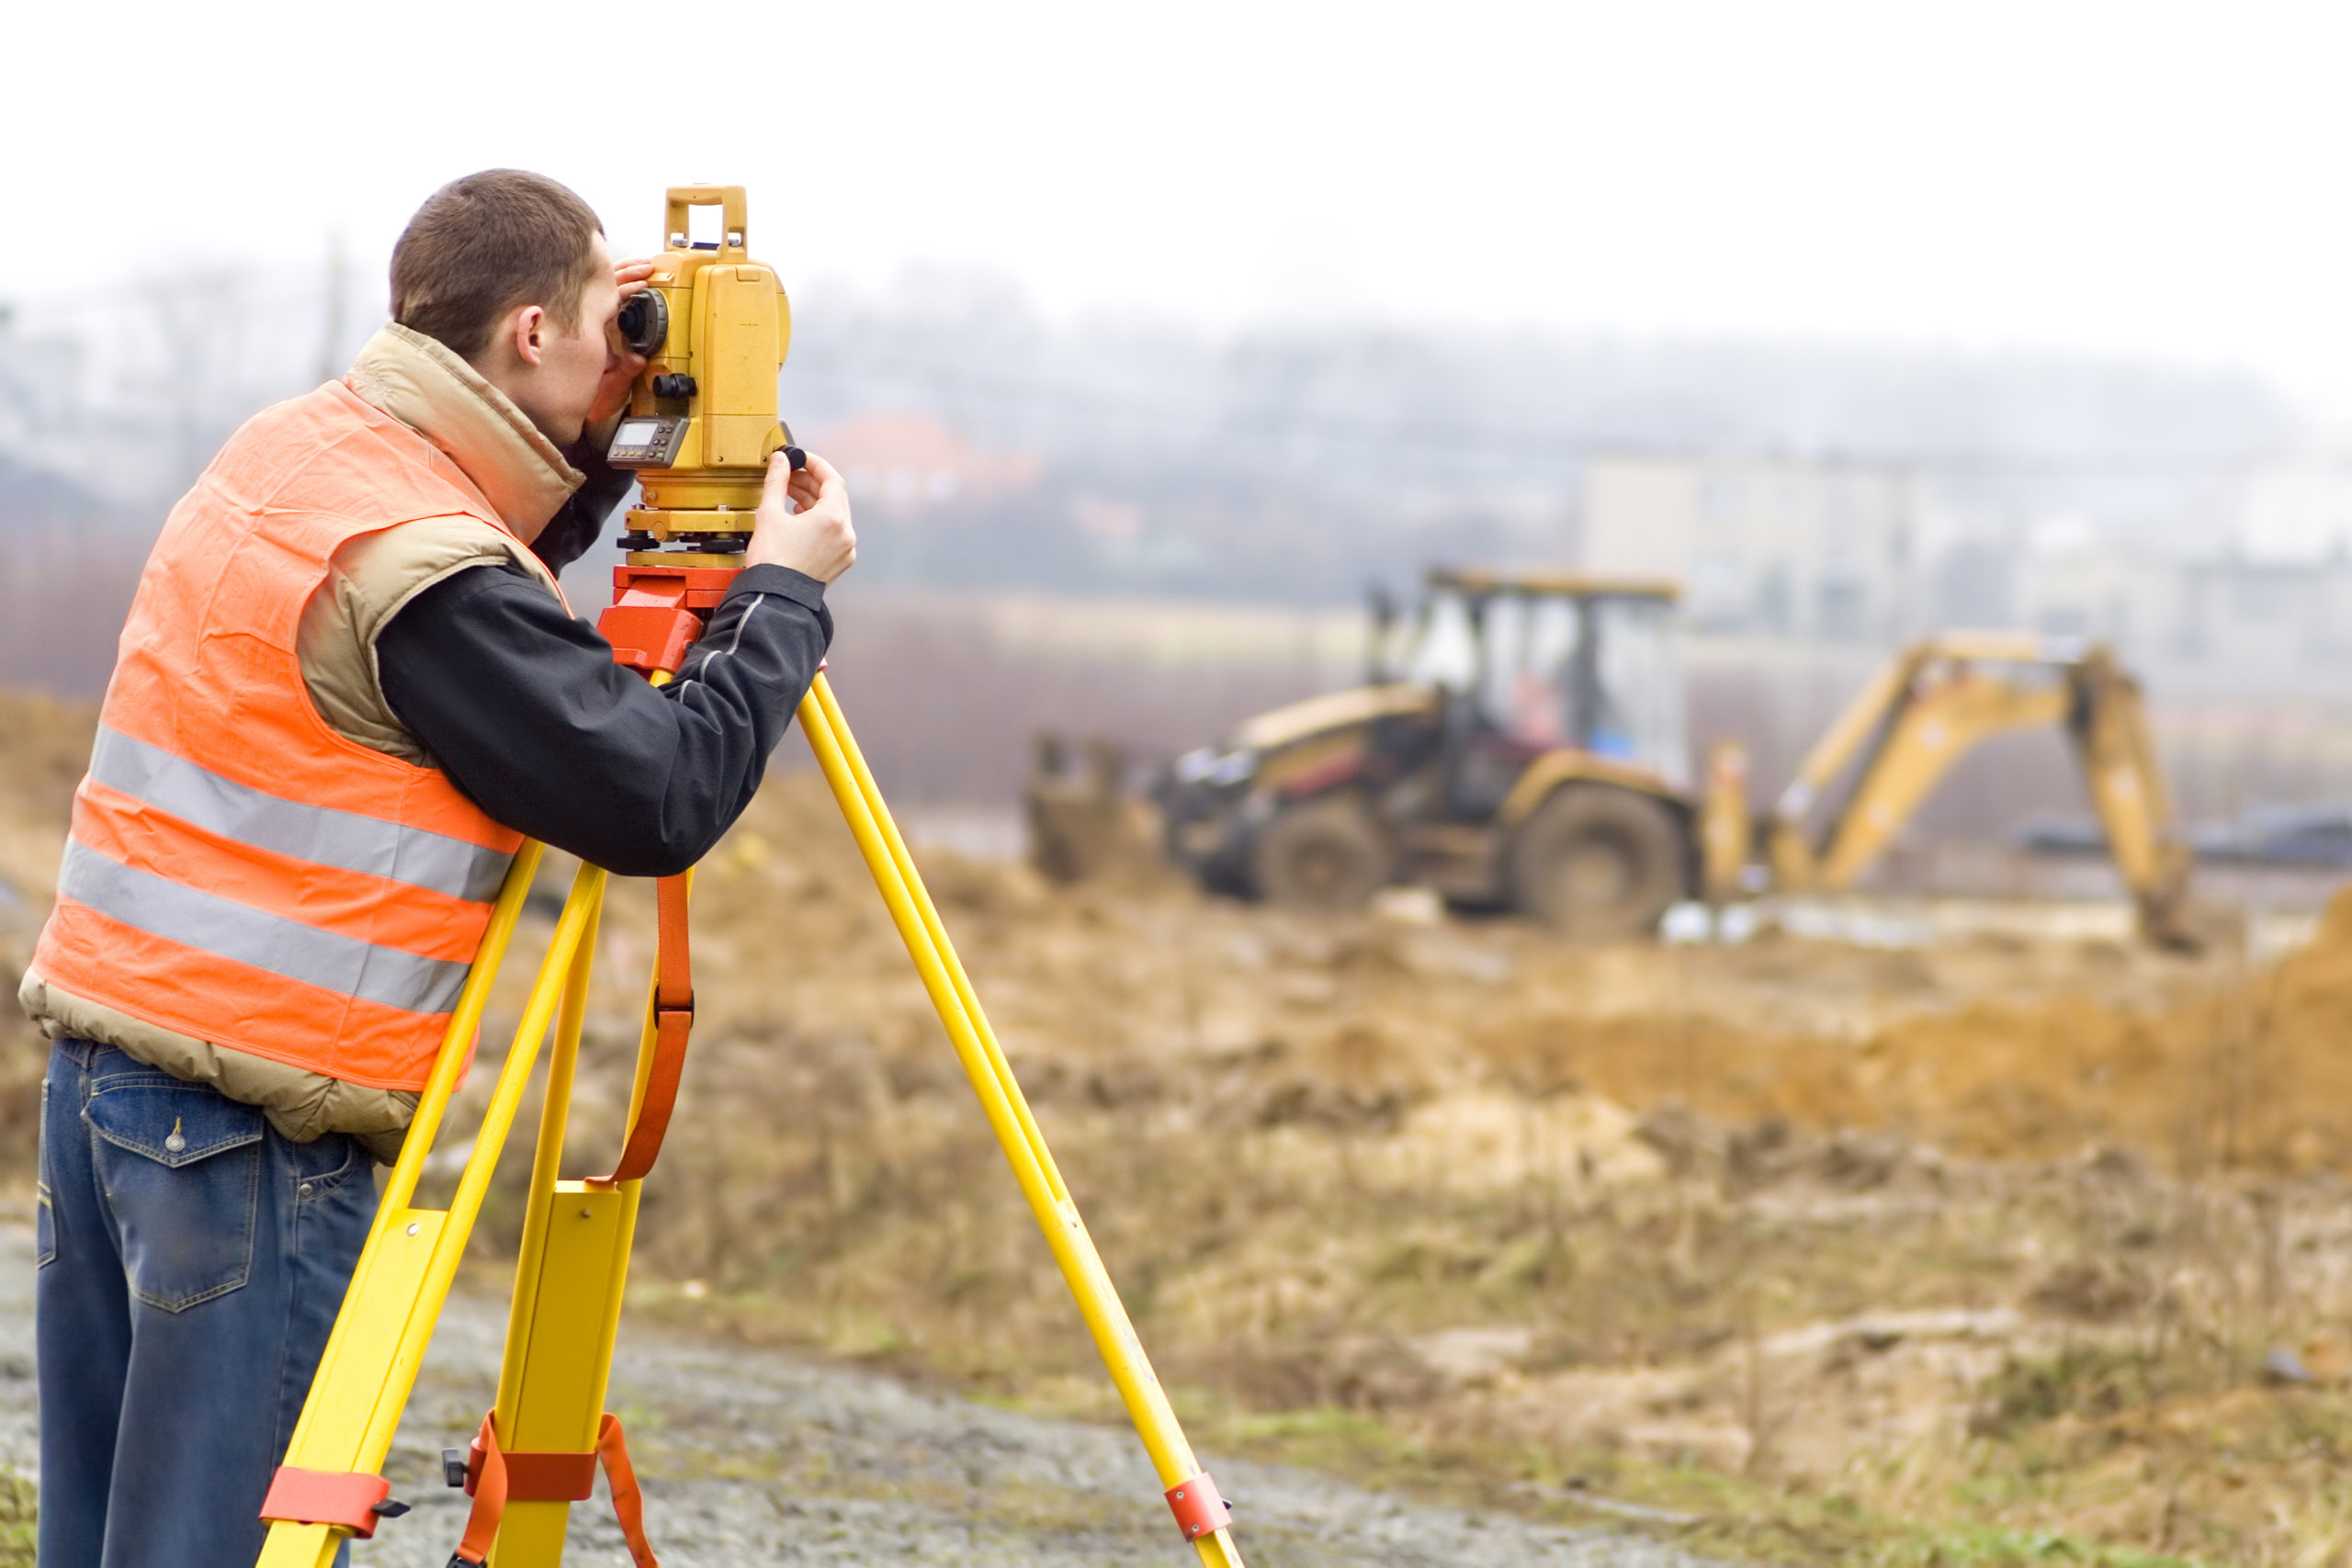 Land surveyor working with total station on a construction site (excavator is beyond depth of field)